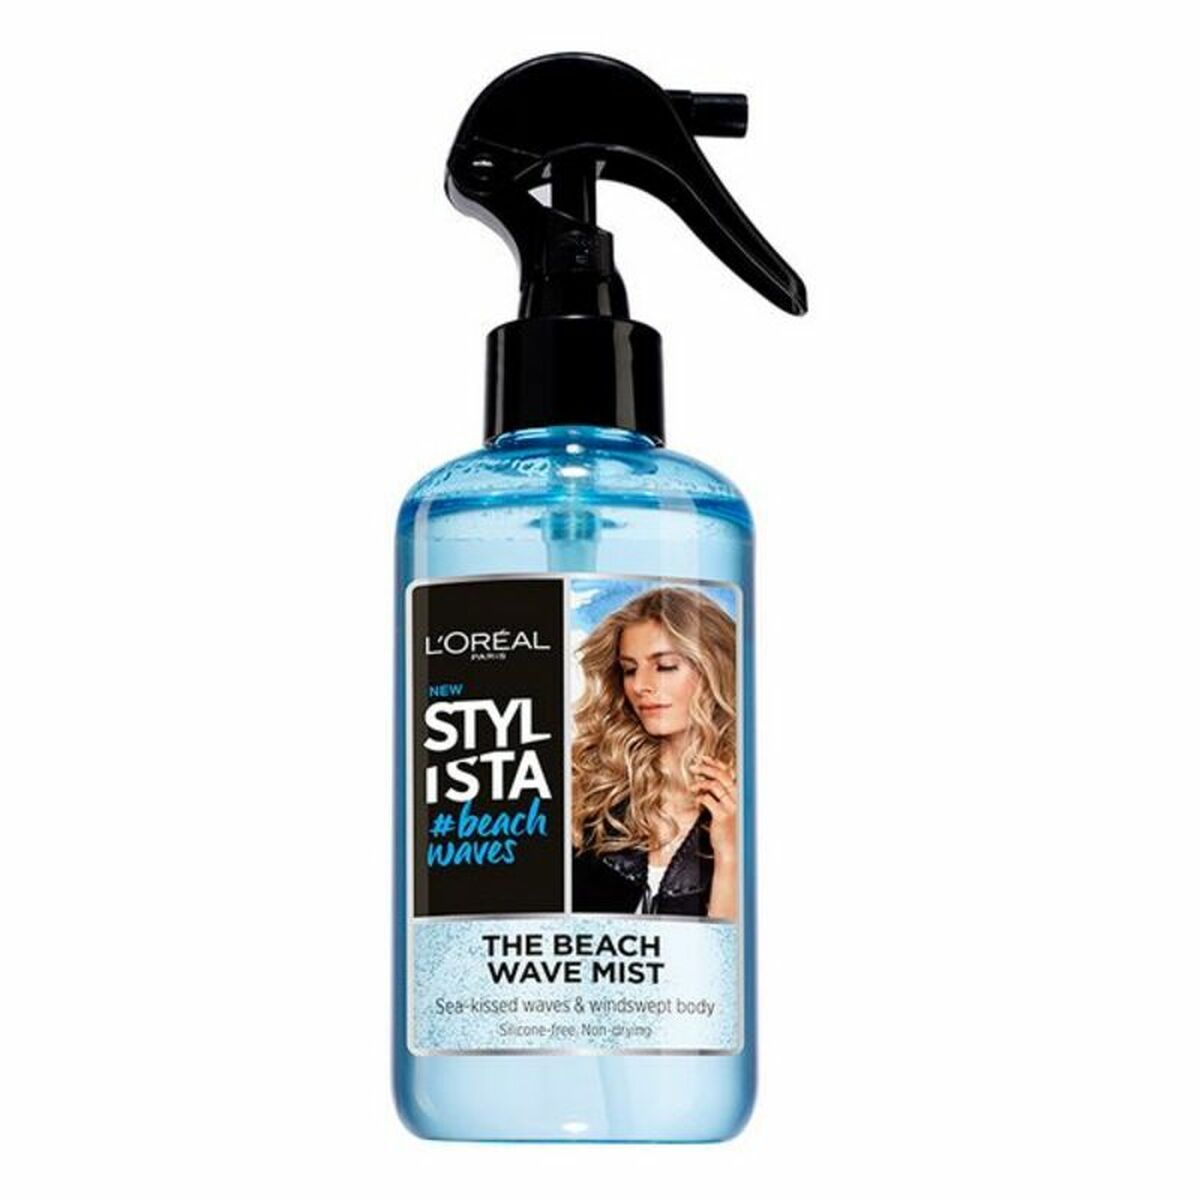 Moulding Spray The Beach Wave Mist L'Oreal Make Up (200 ml) (200 ml)